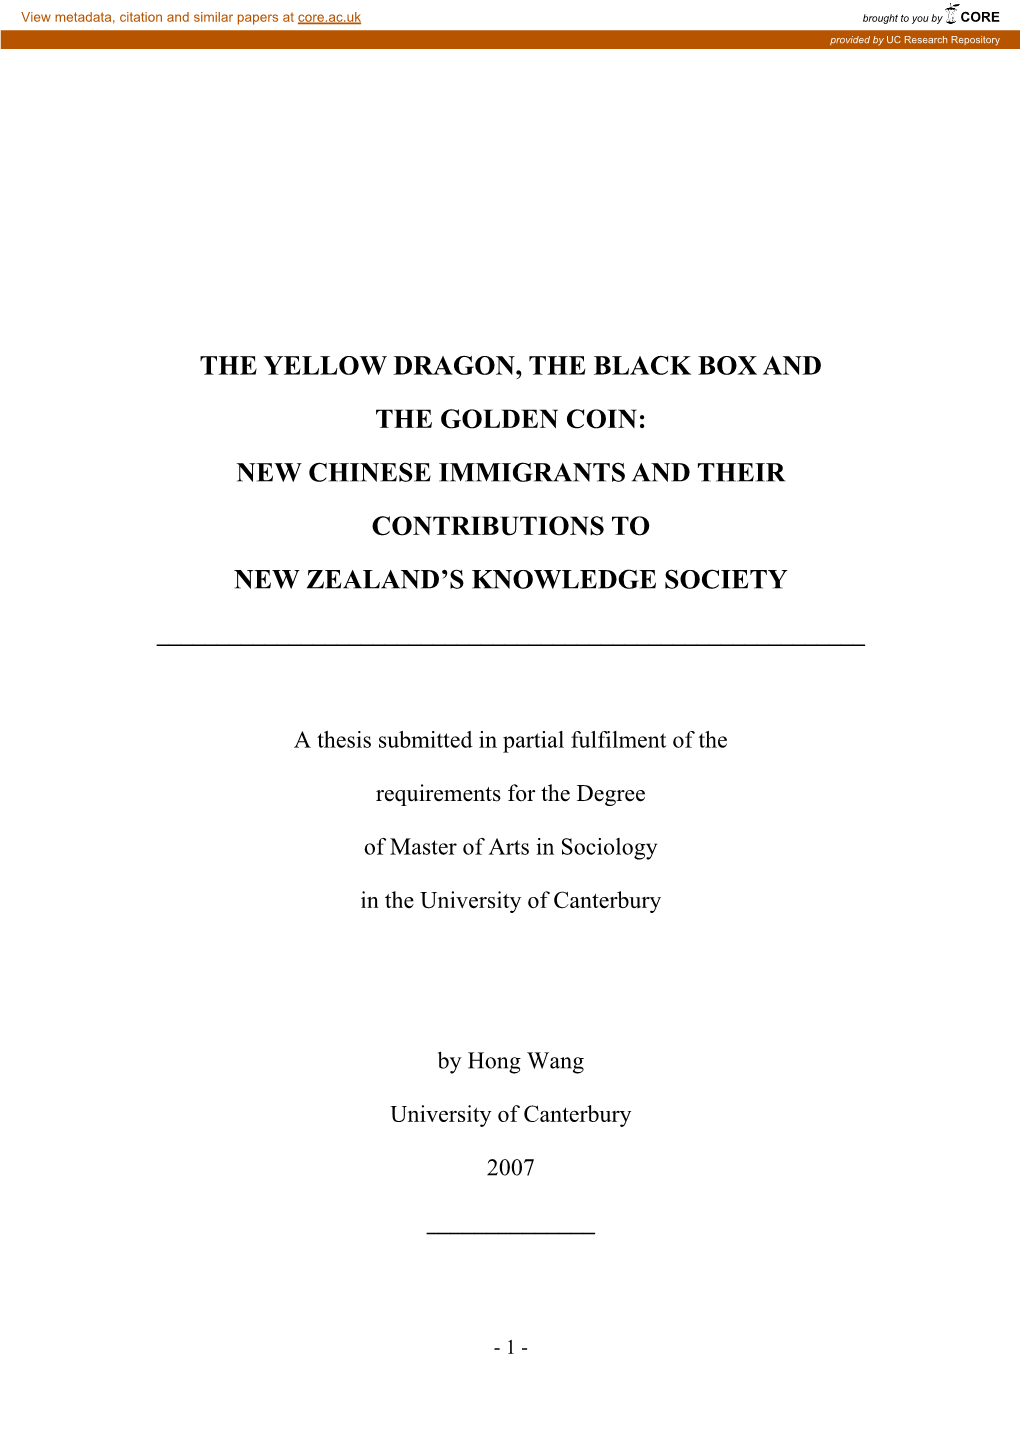 New Chinese Immigrants and Their Contributions to New Zealand’S Knowledge Society